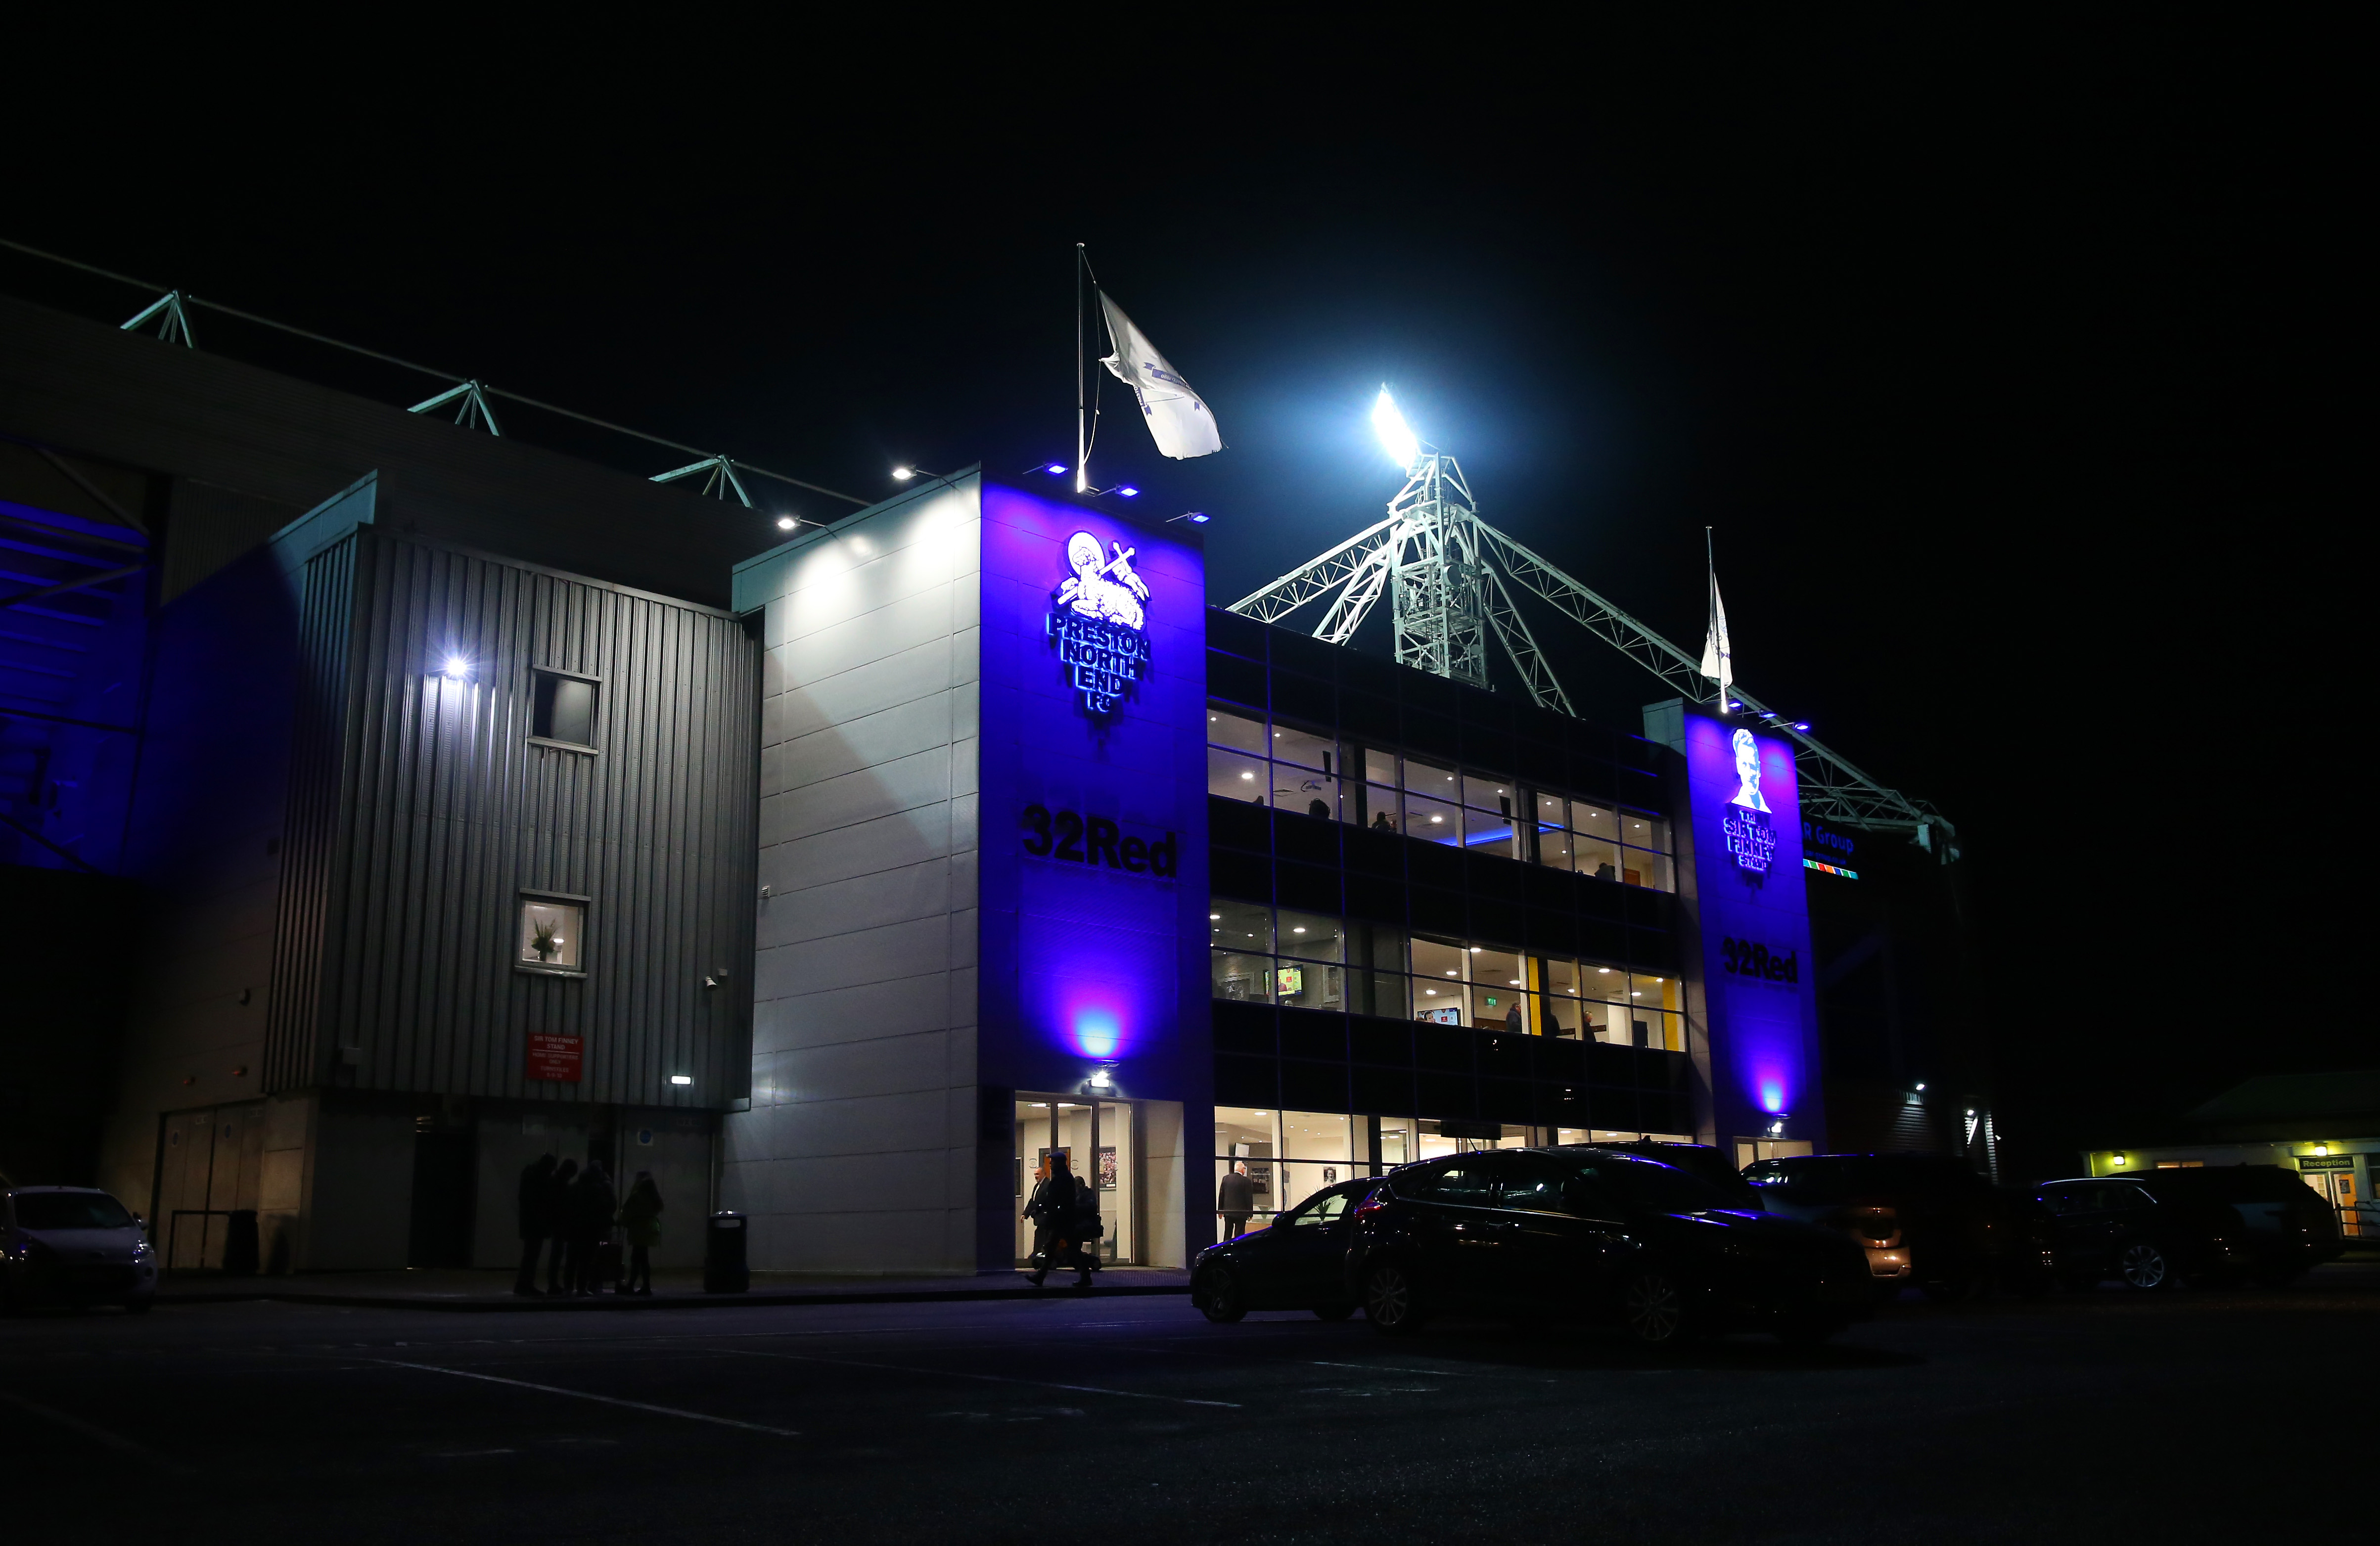 PRESTON, ENGLAND - FEBRUARY 01:  General view outside the stadium prior to the Sky Bet Championship match between Preston North End and Derby County  at Deepdale on February 01, 2019 in Preston, England. (Photo by Alex Livesey/Getty Images)